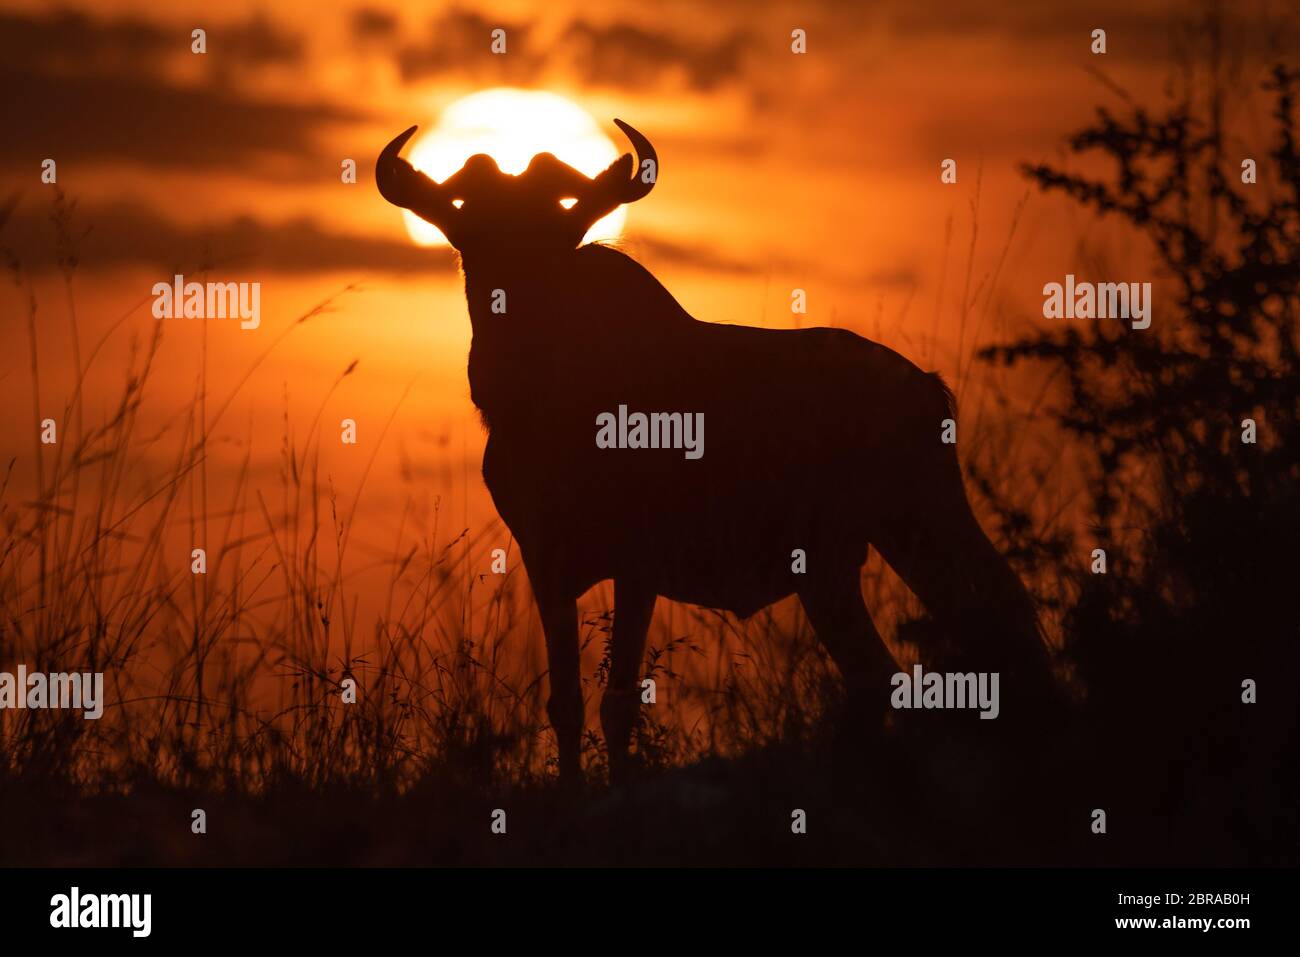 Blue wildebeest standing in silhouette against sunset Stock Photo